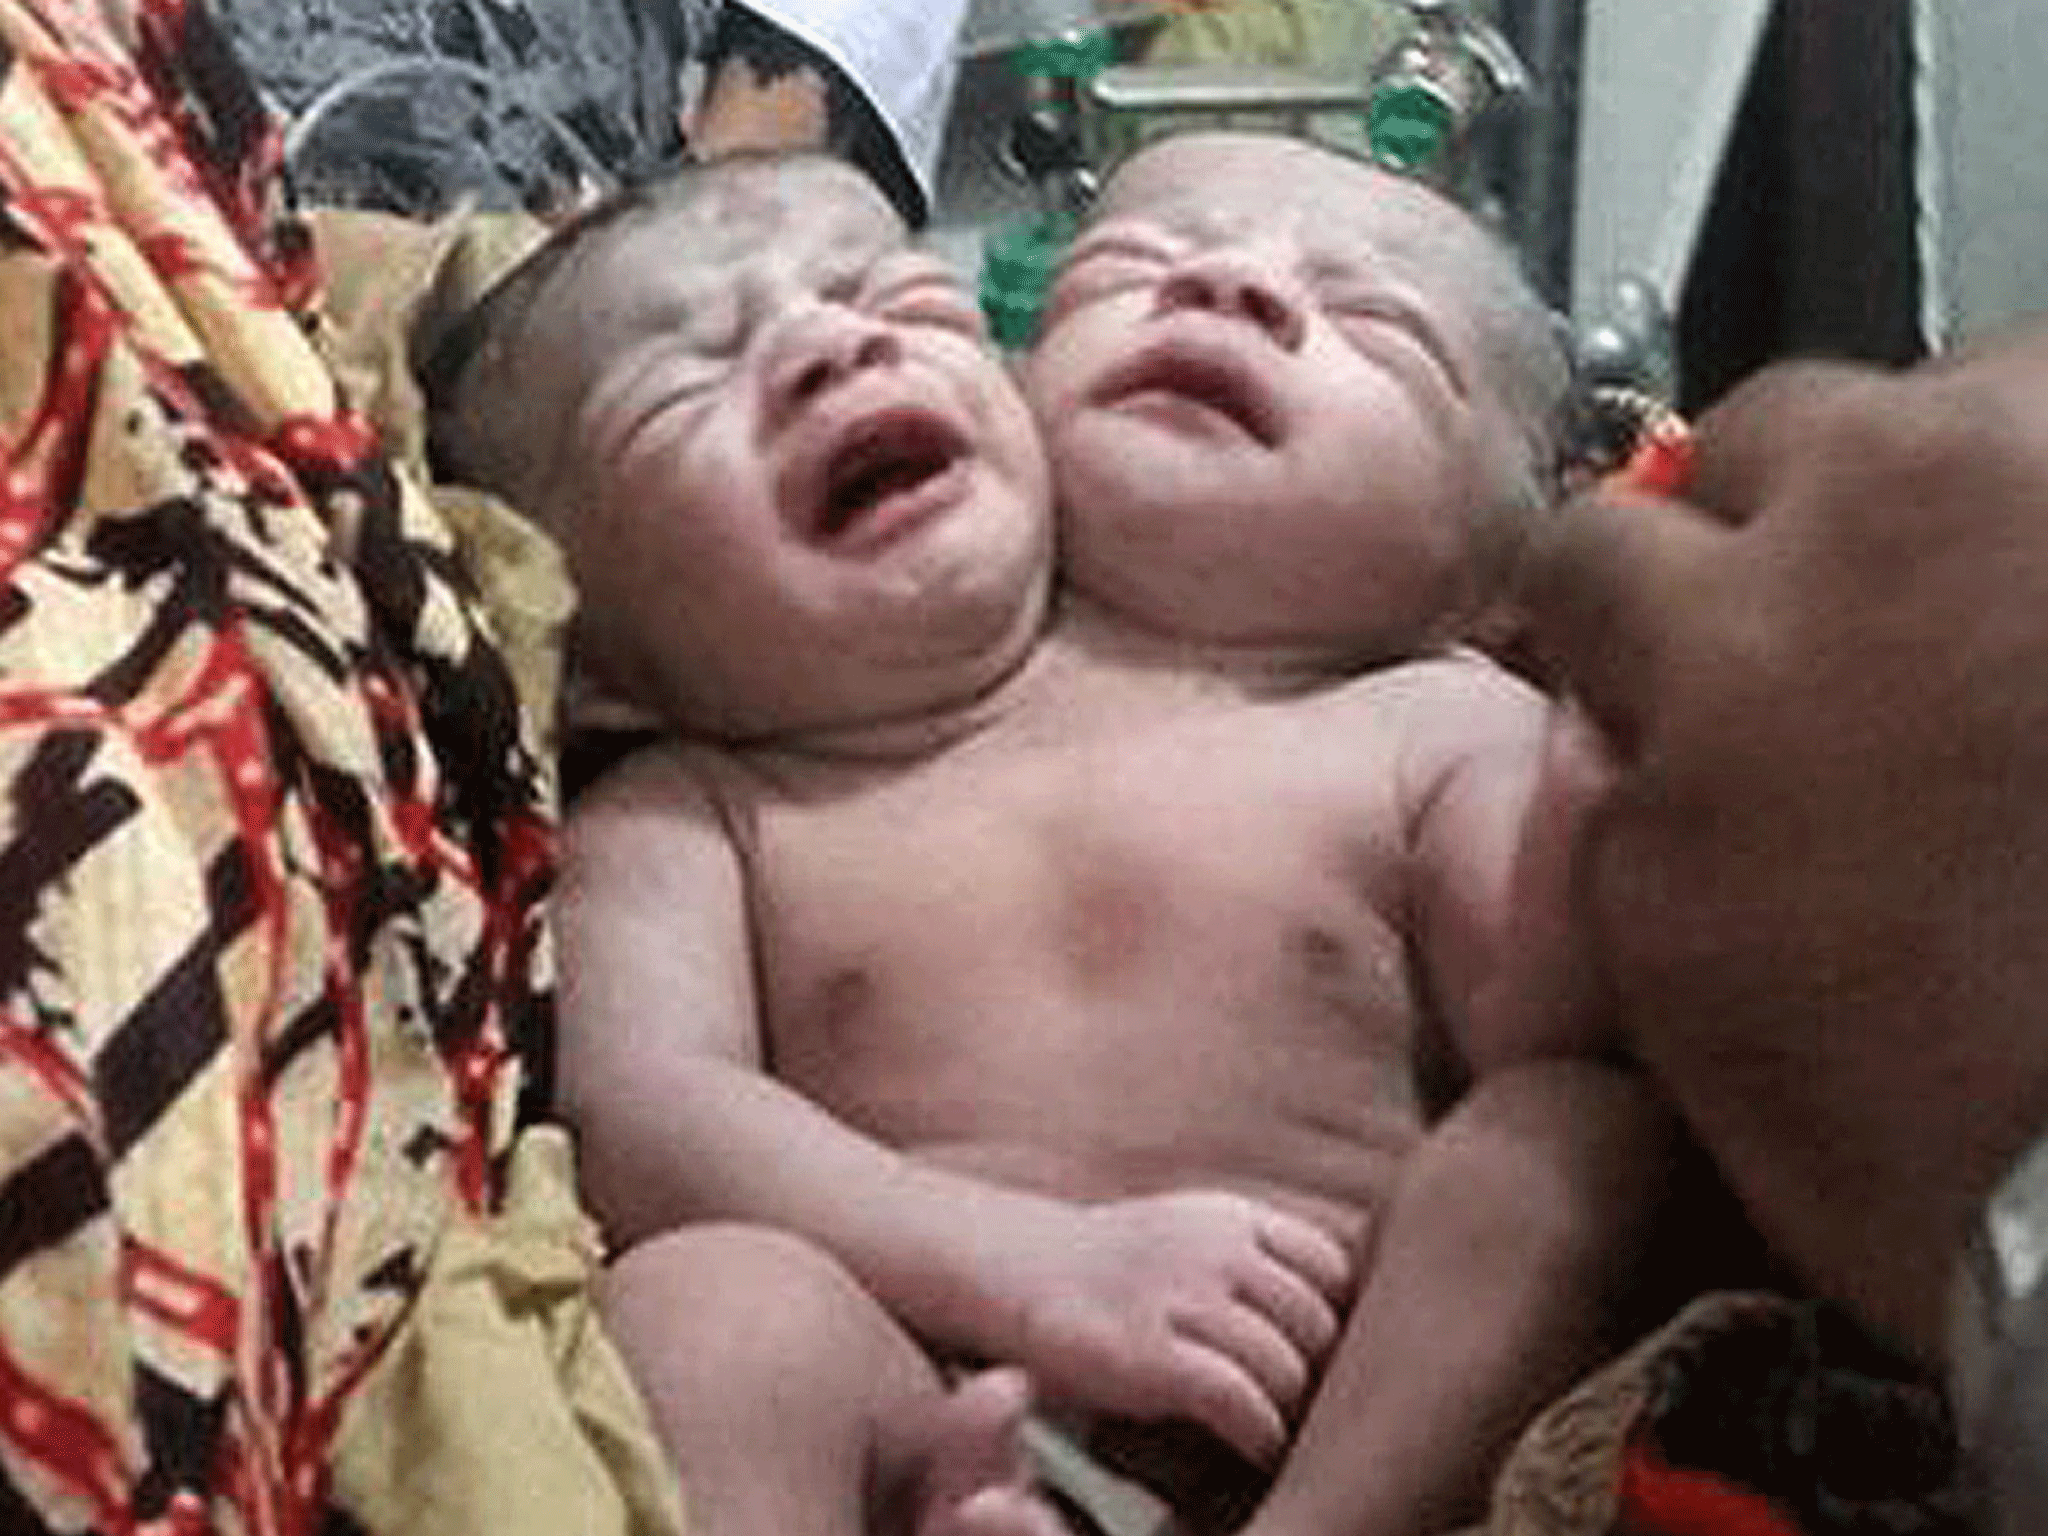 The birth in a hospital near Dhaka, Bangladesh, could be a case of conjoined twins, neurosurgeons have said